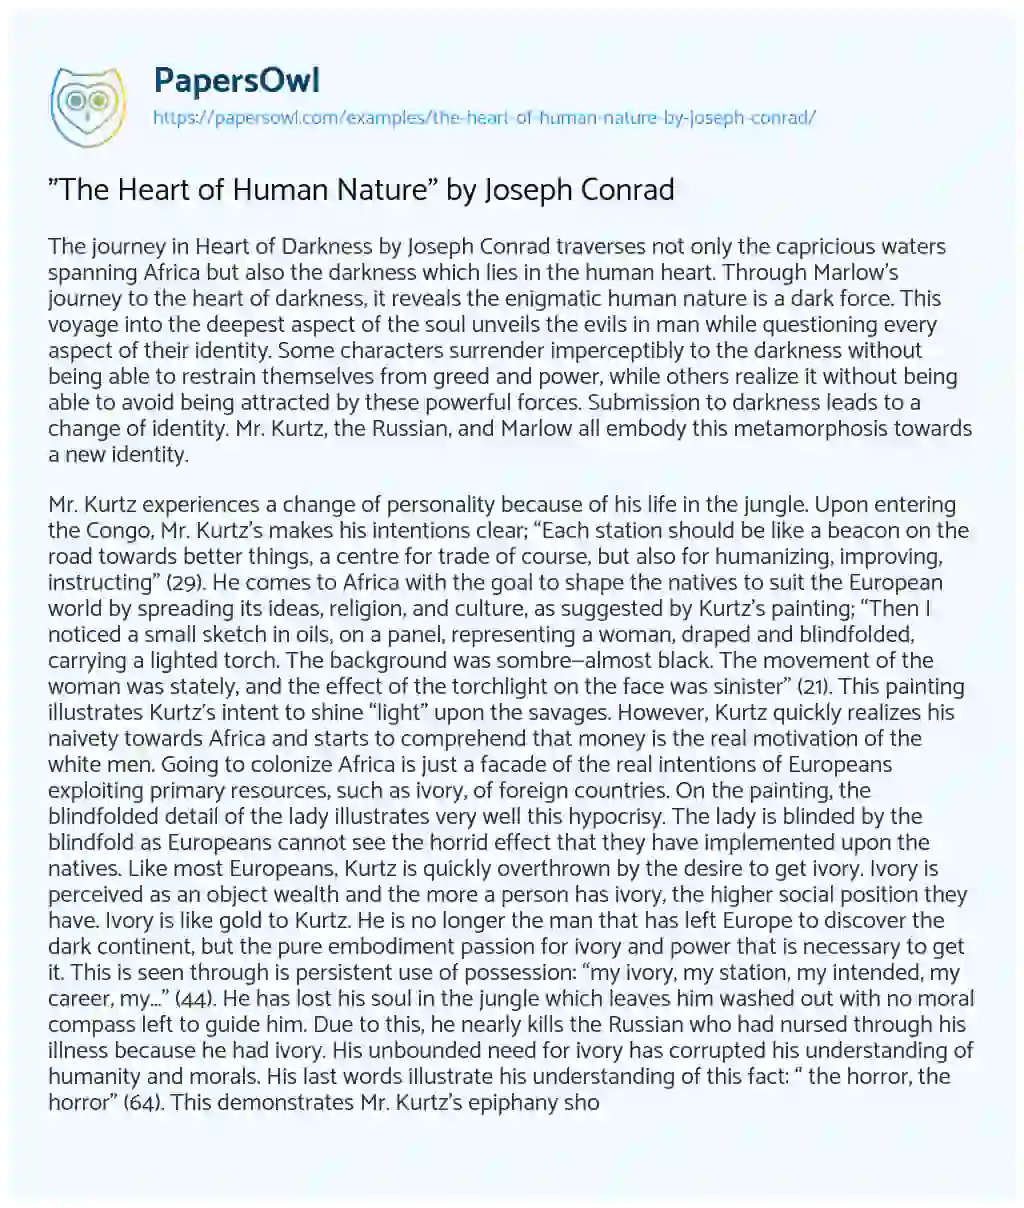 Essay on “The Heart of Human Nature” by Joseph Conrad